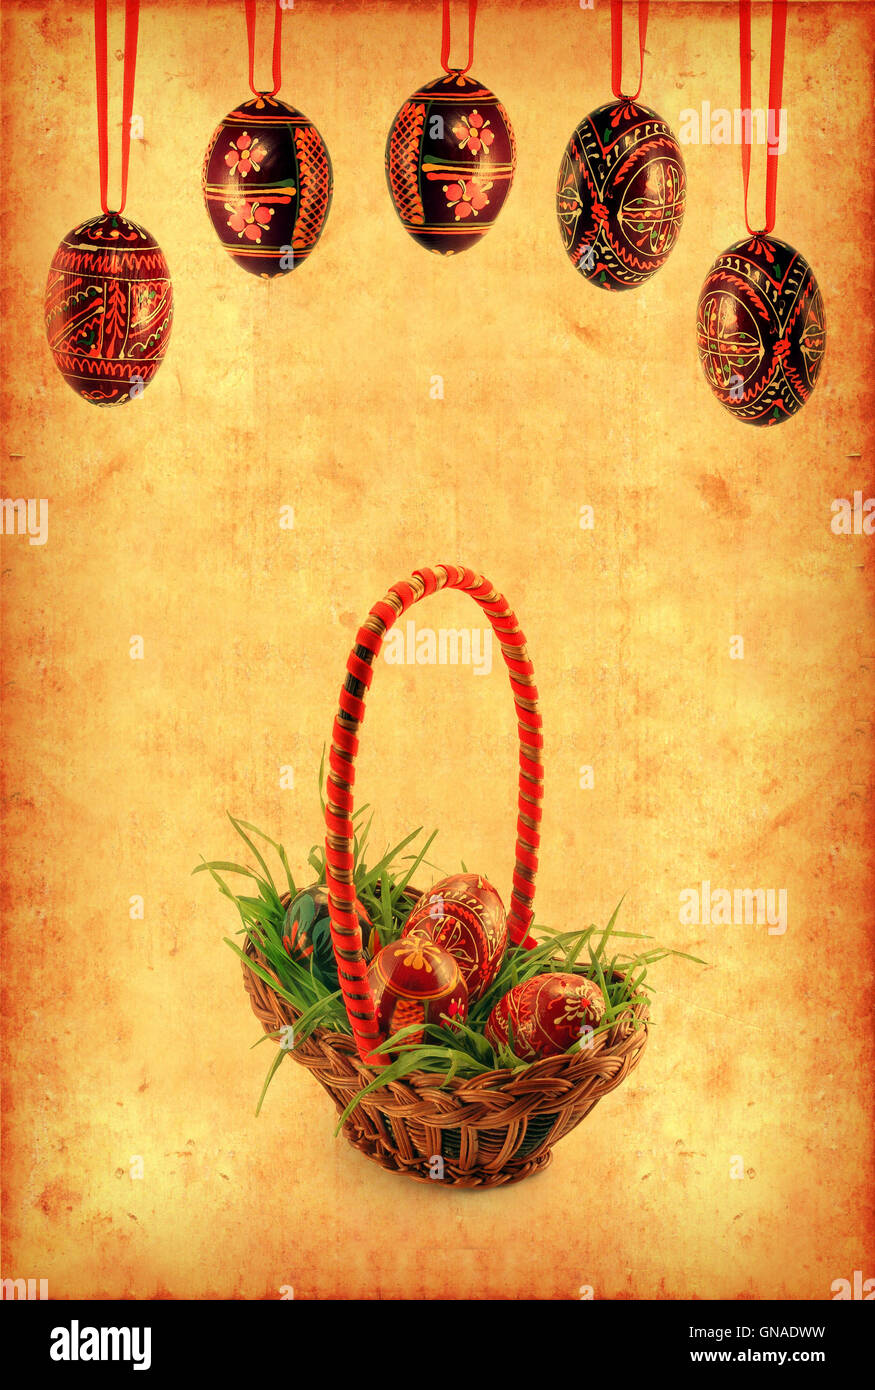 Grunge wallpaper with Easter basket Stock Photo